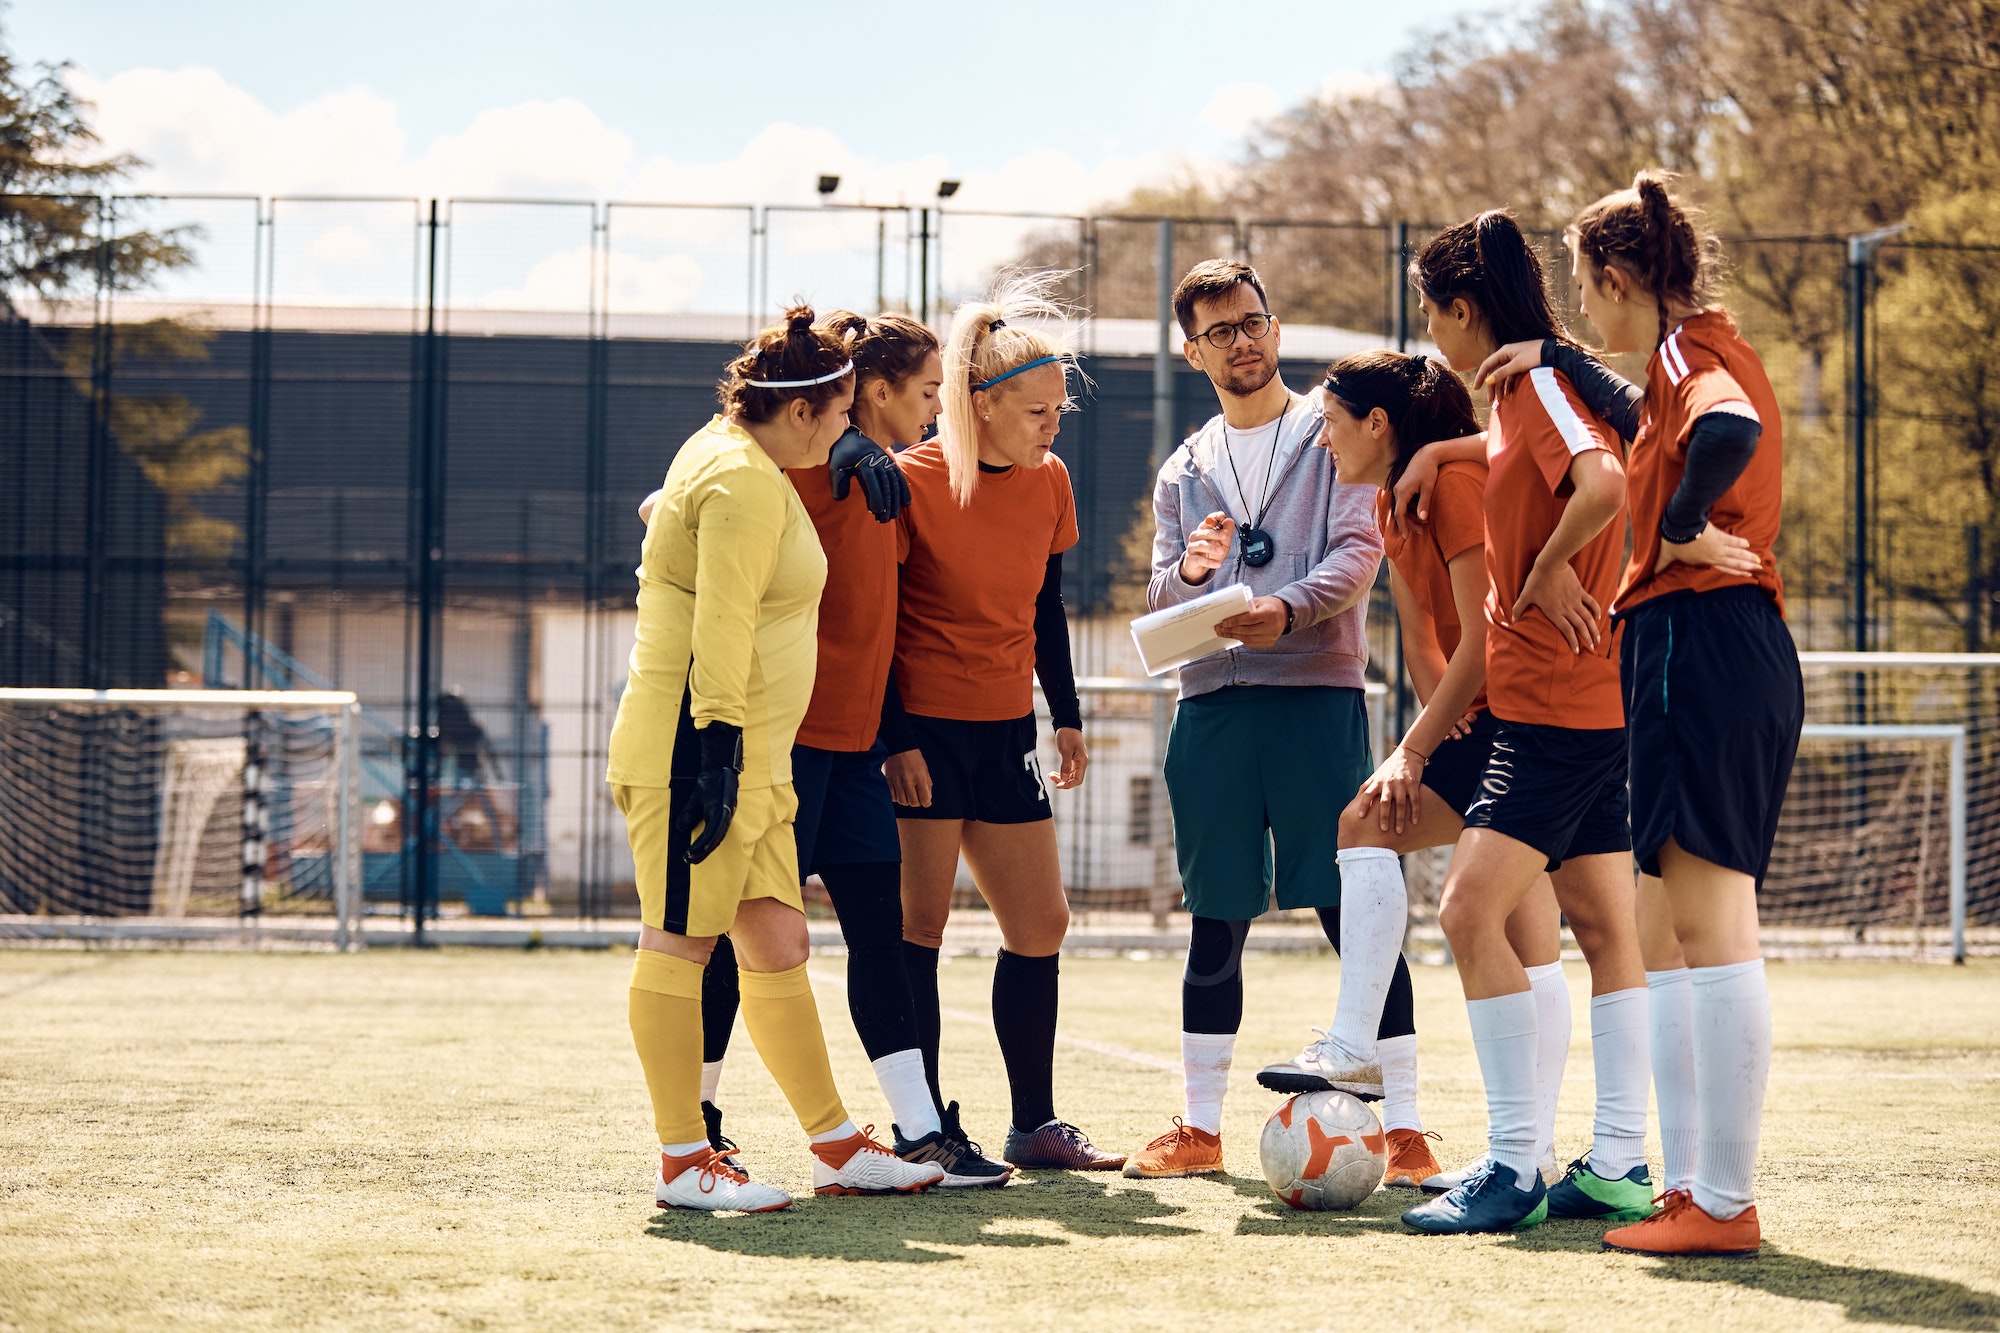 Soccer coach planning game strategy with female team on playing field.